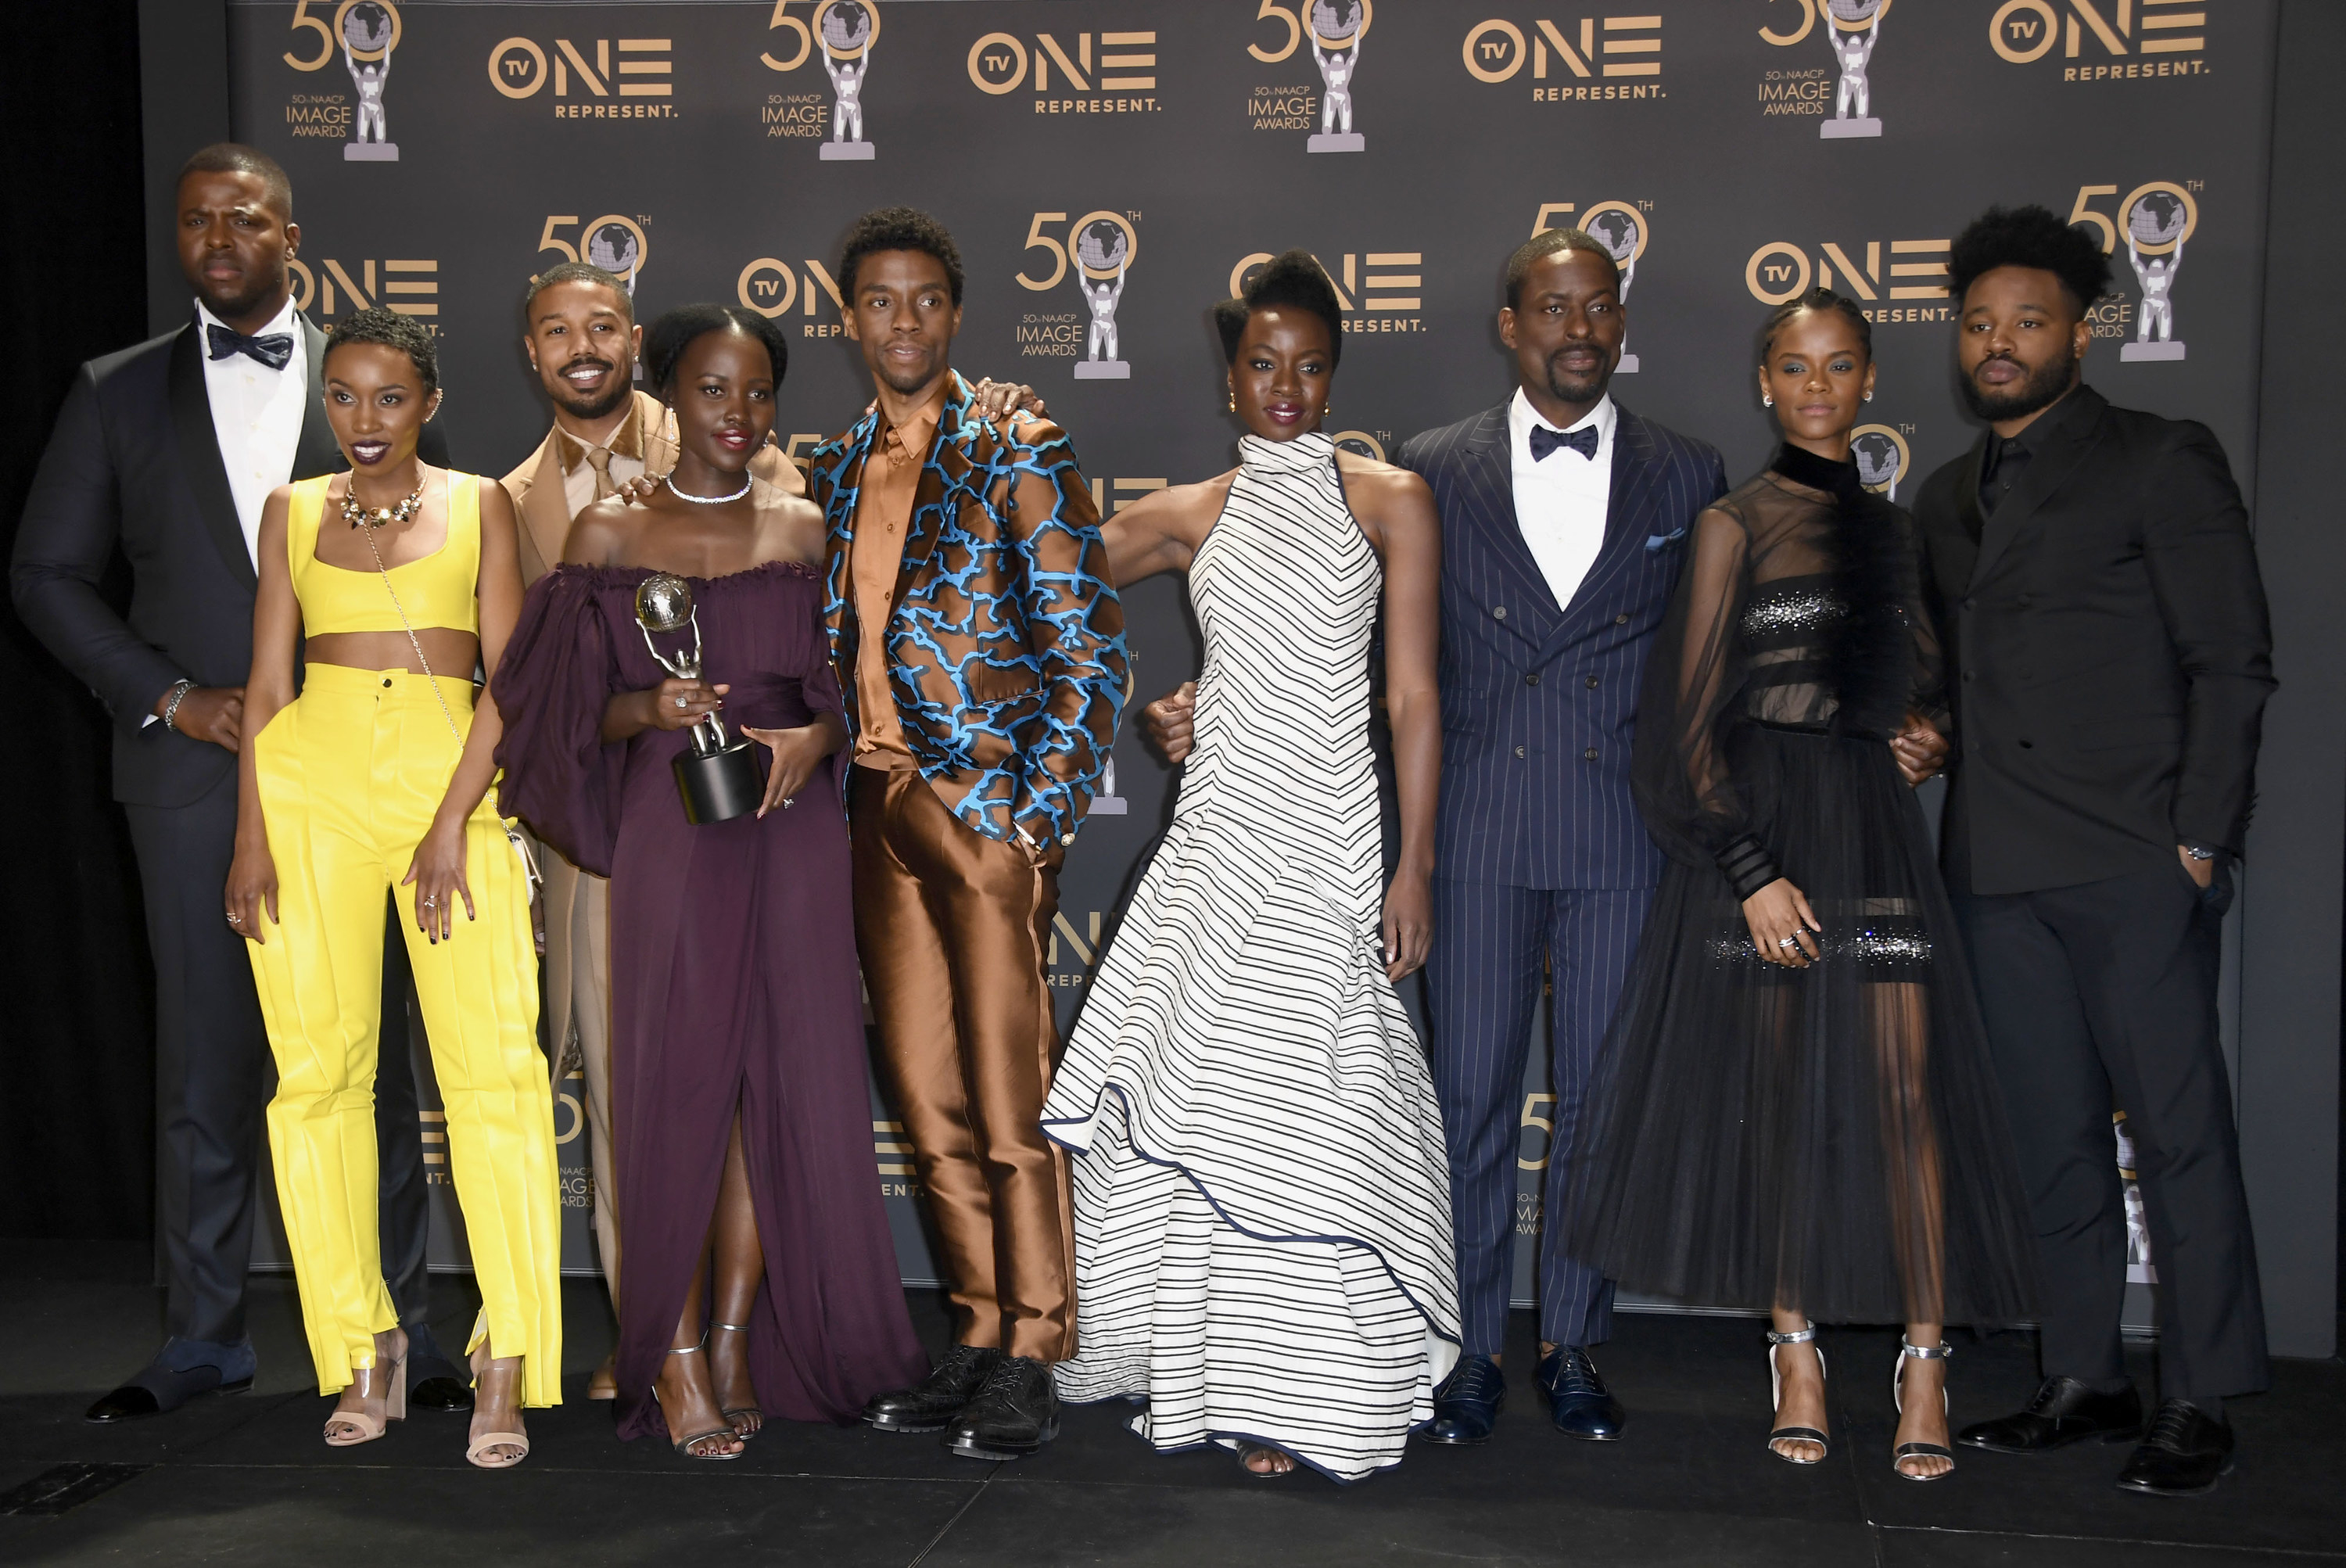 The Black Panther cast